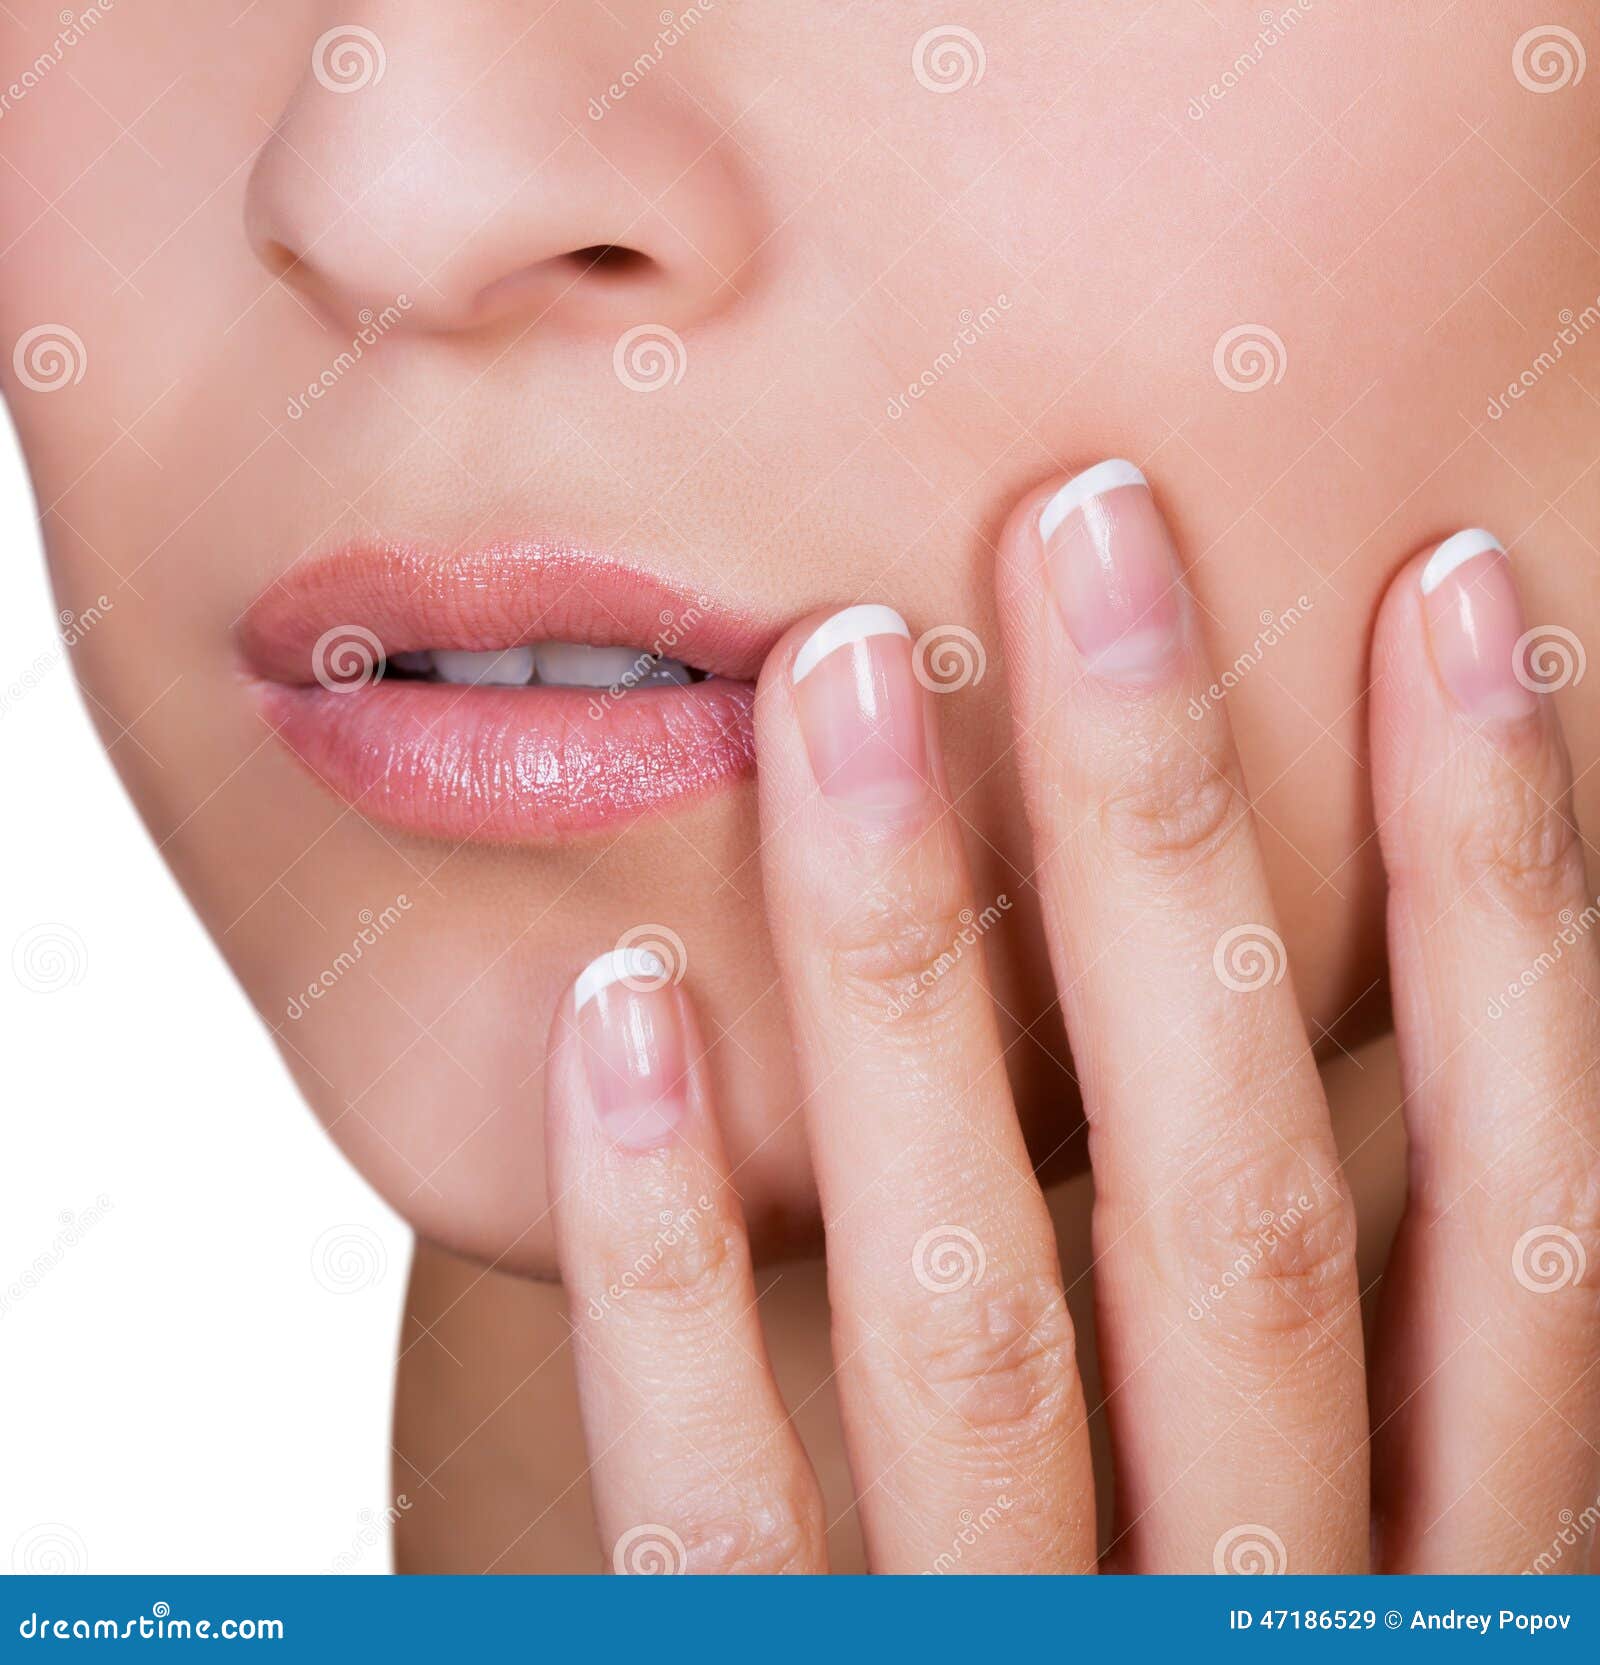 Woman With Beautiful Manicured Finger Nails Stock Image Image Of Elegance Hygiene 47186529